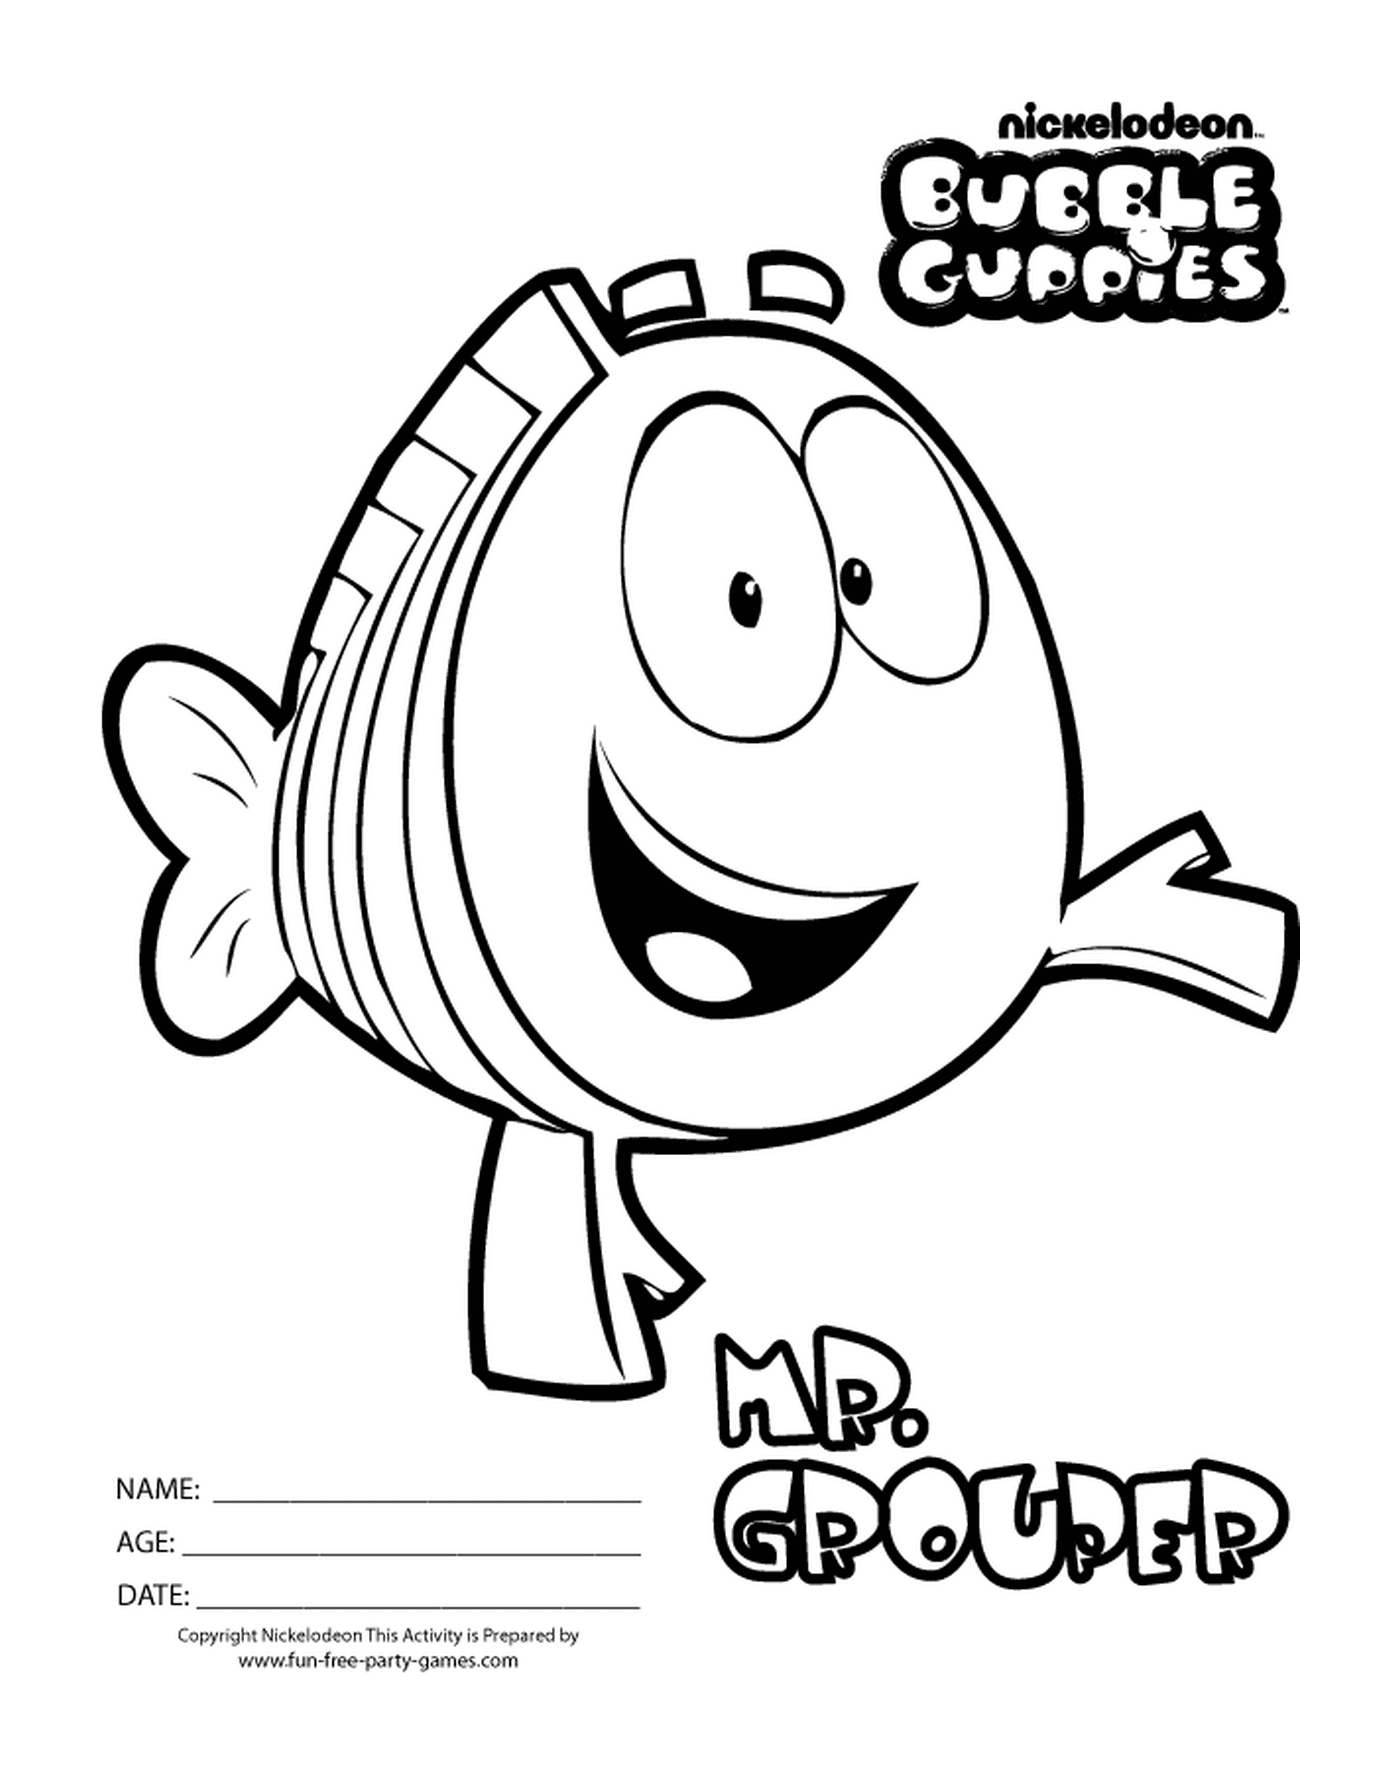  Mr Grouper des Bubble Guppies, an animated fish 